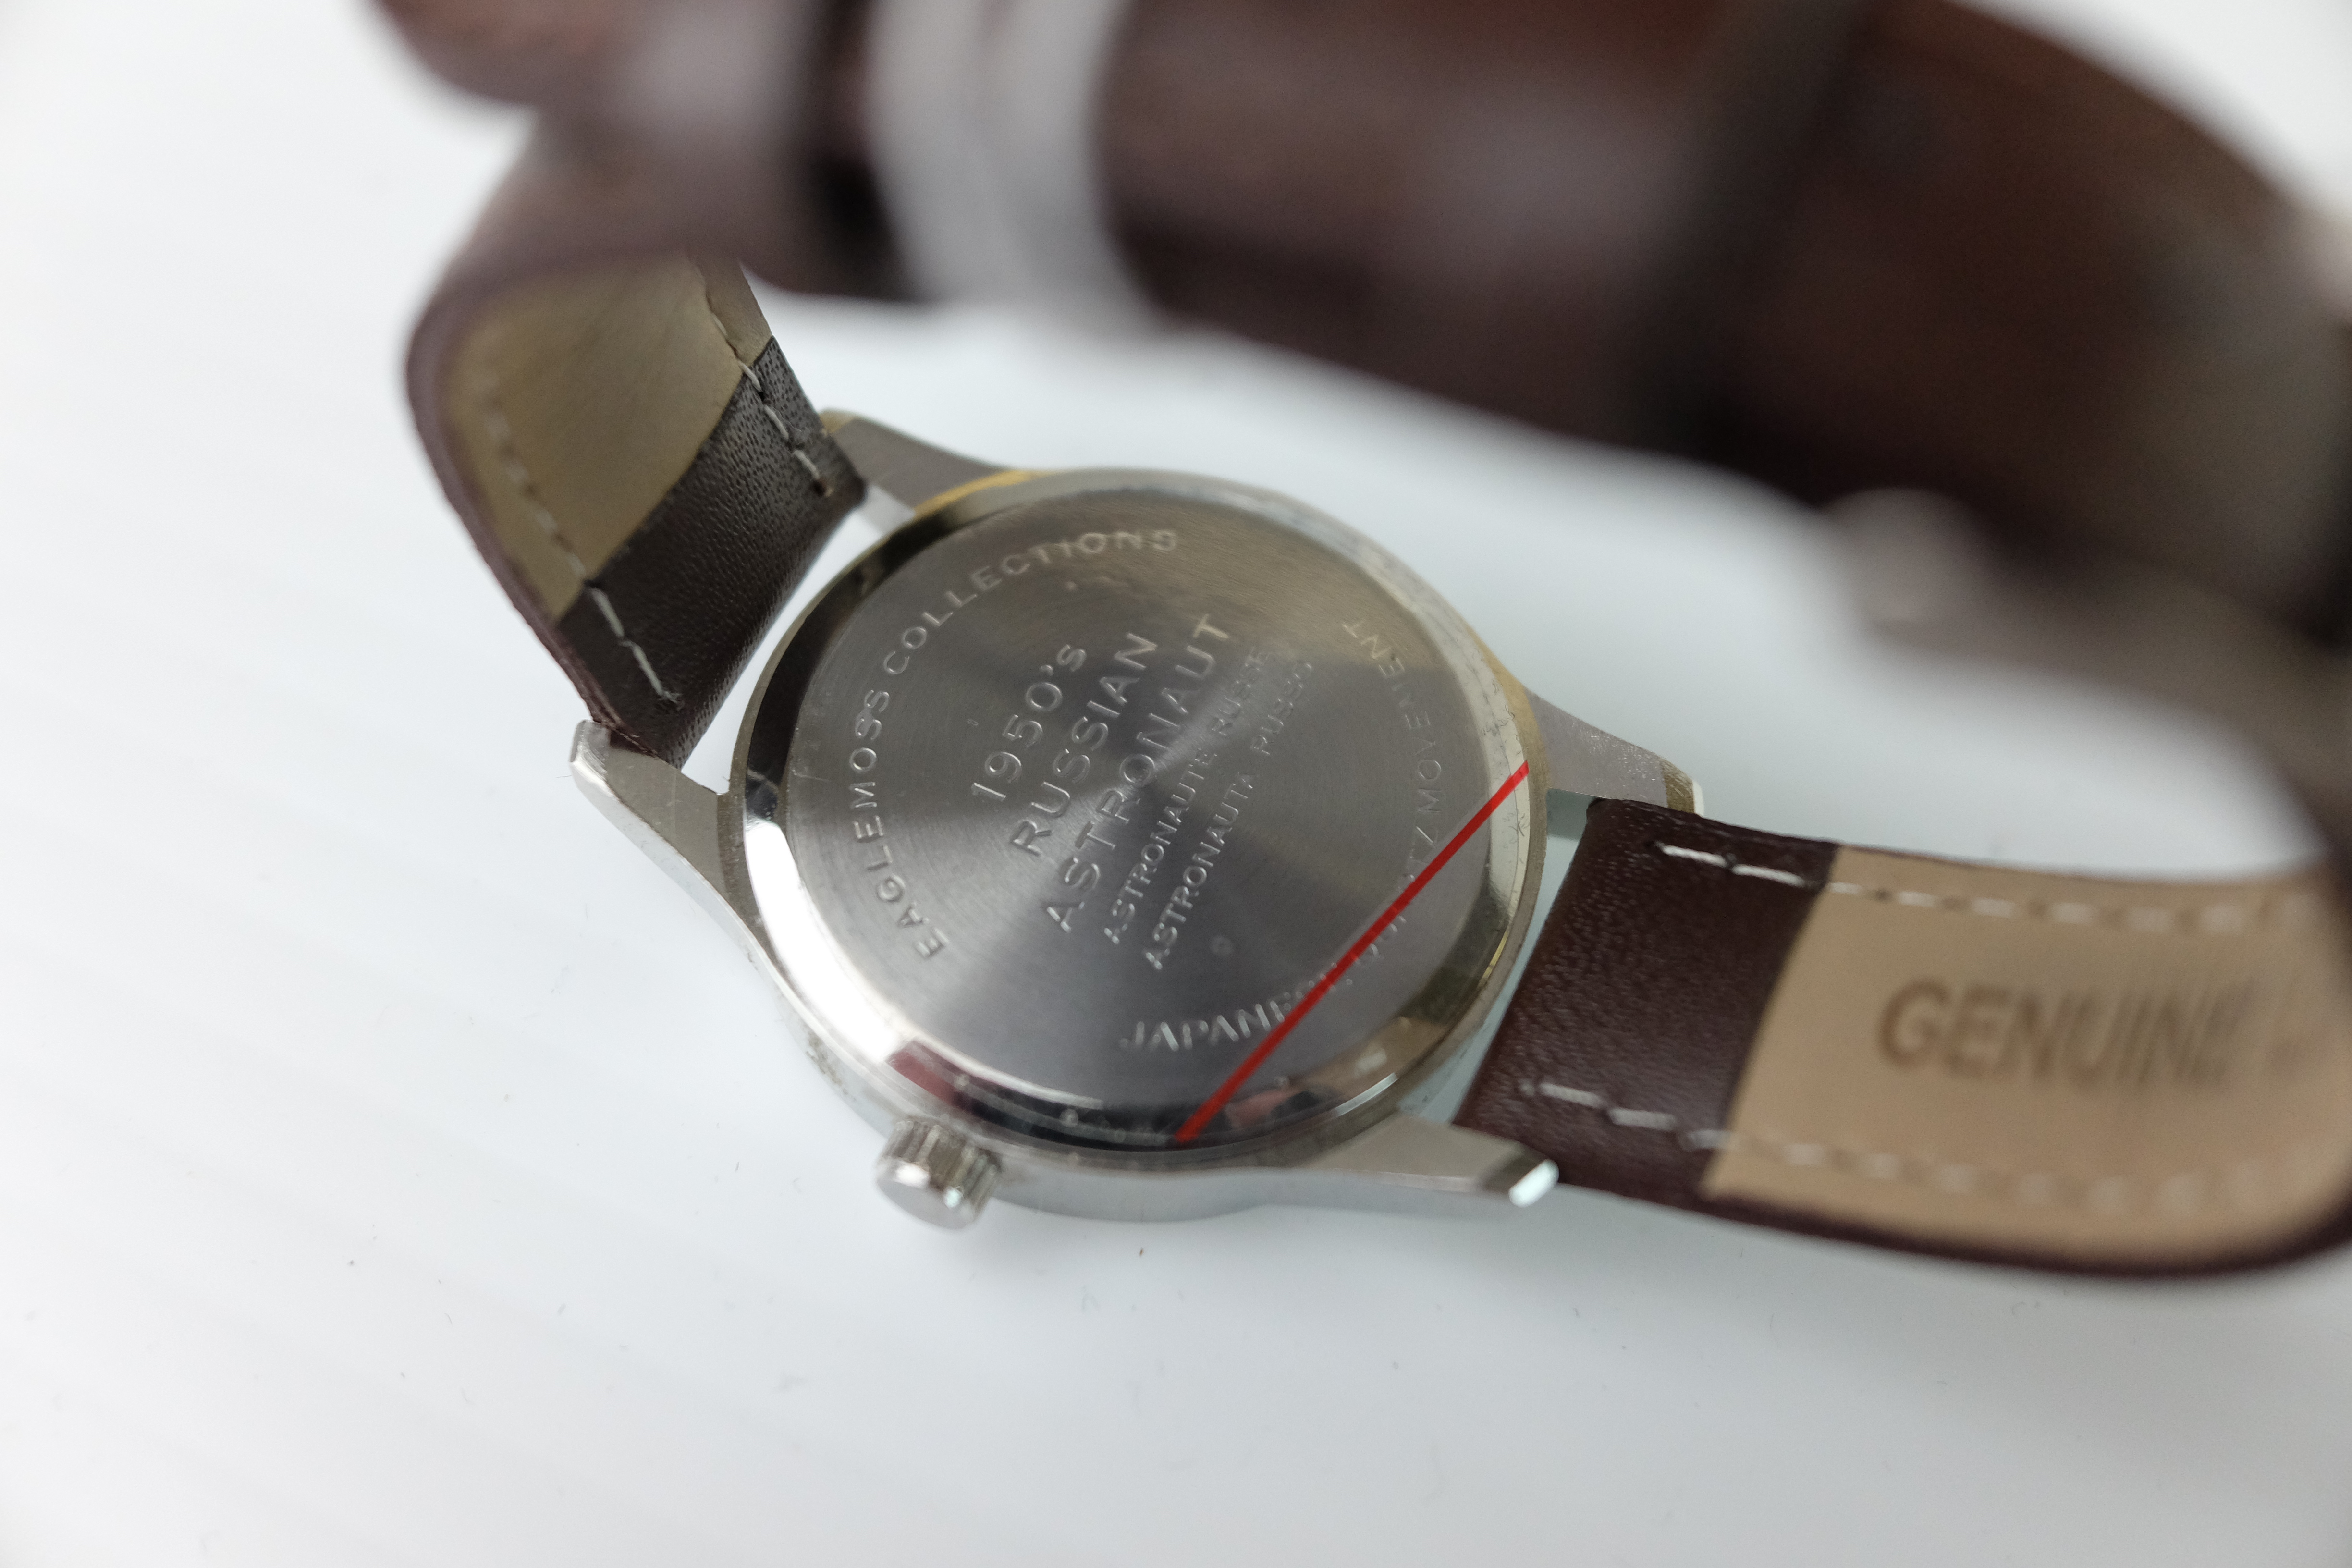 Russian Style Astronaut Watch on leather strap - Image 2 of 2